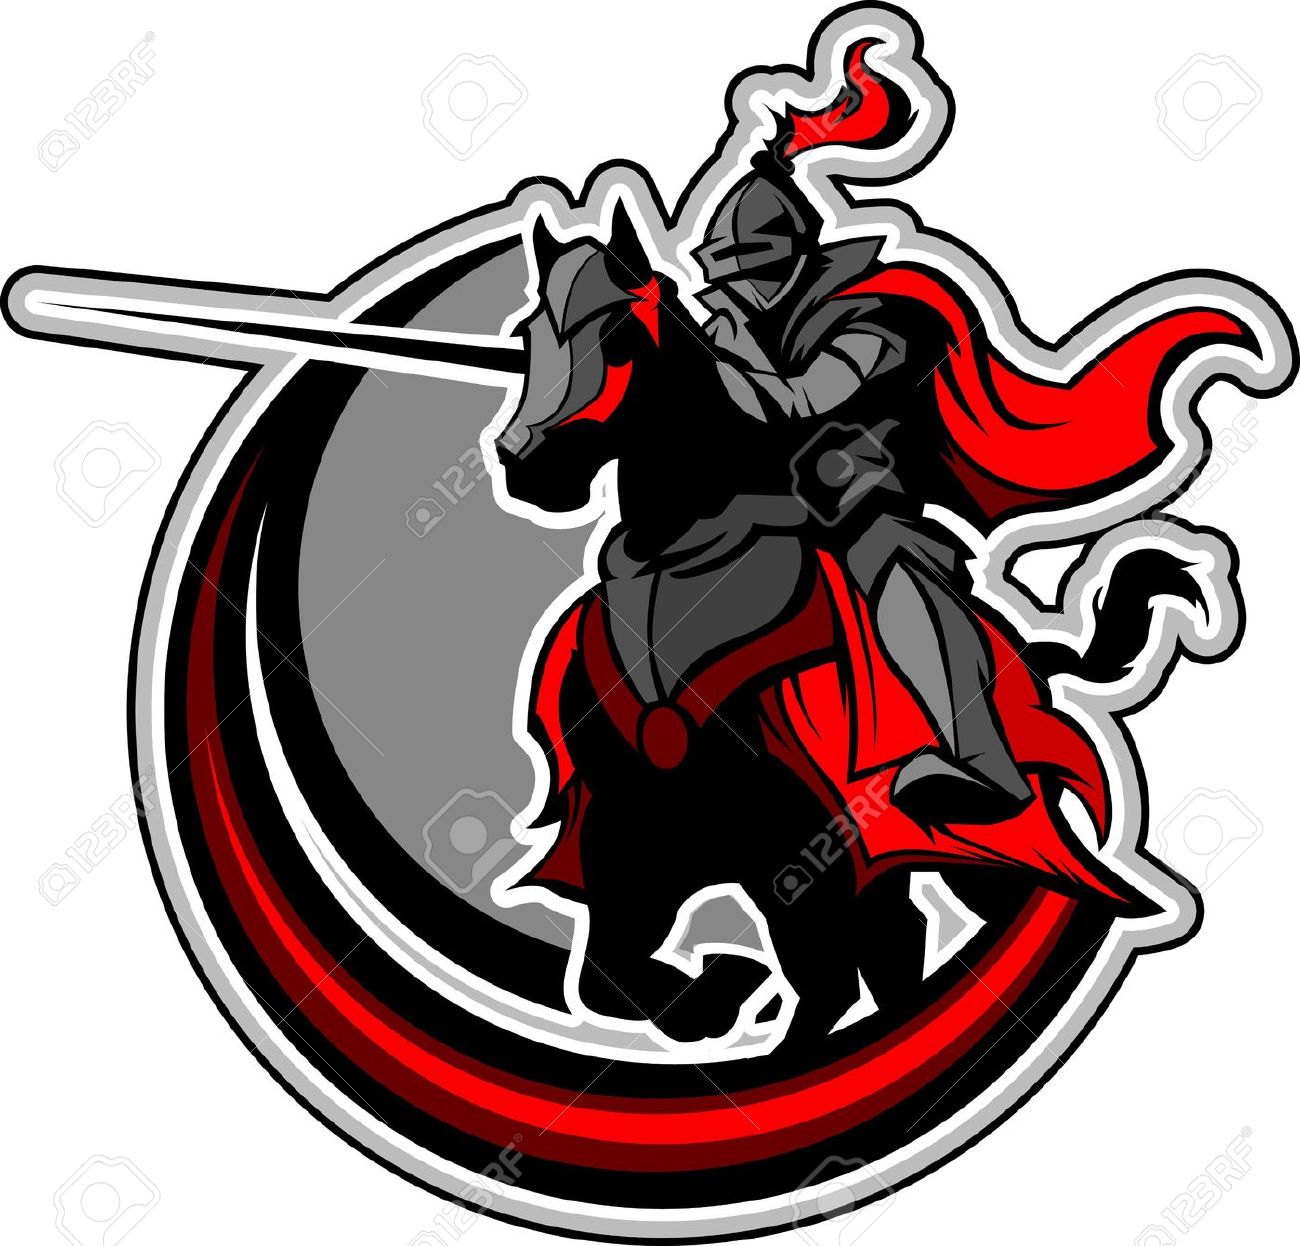 Armored Man On Horses Clipart.